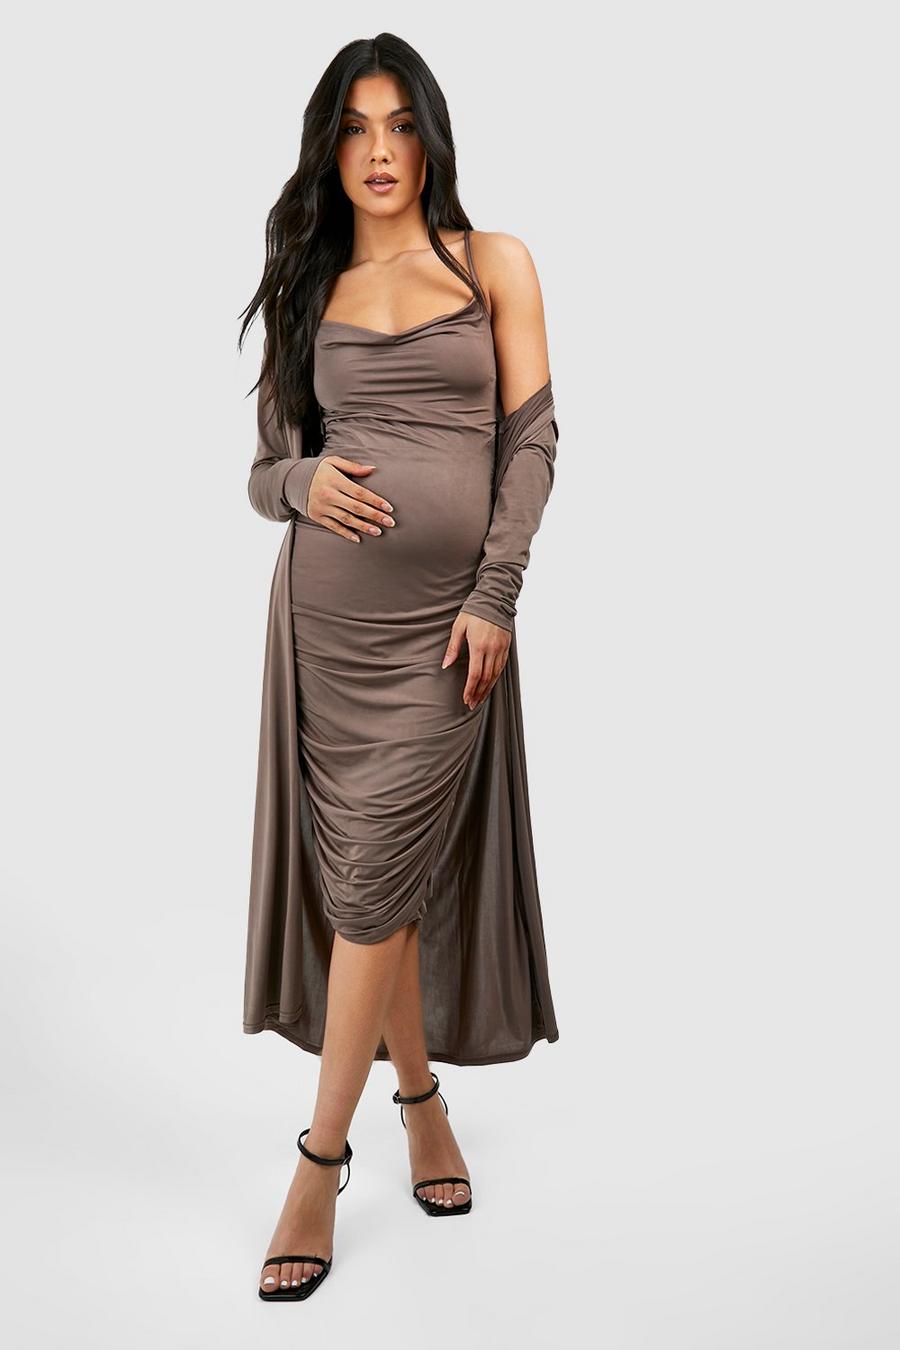 Mocha Maternity Strappy Cowl Neck Dress And Duster Coat